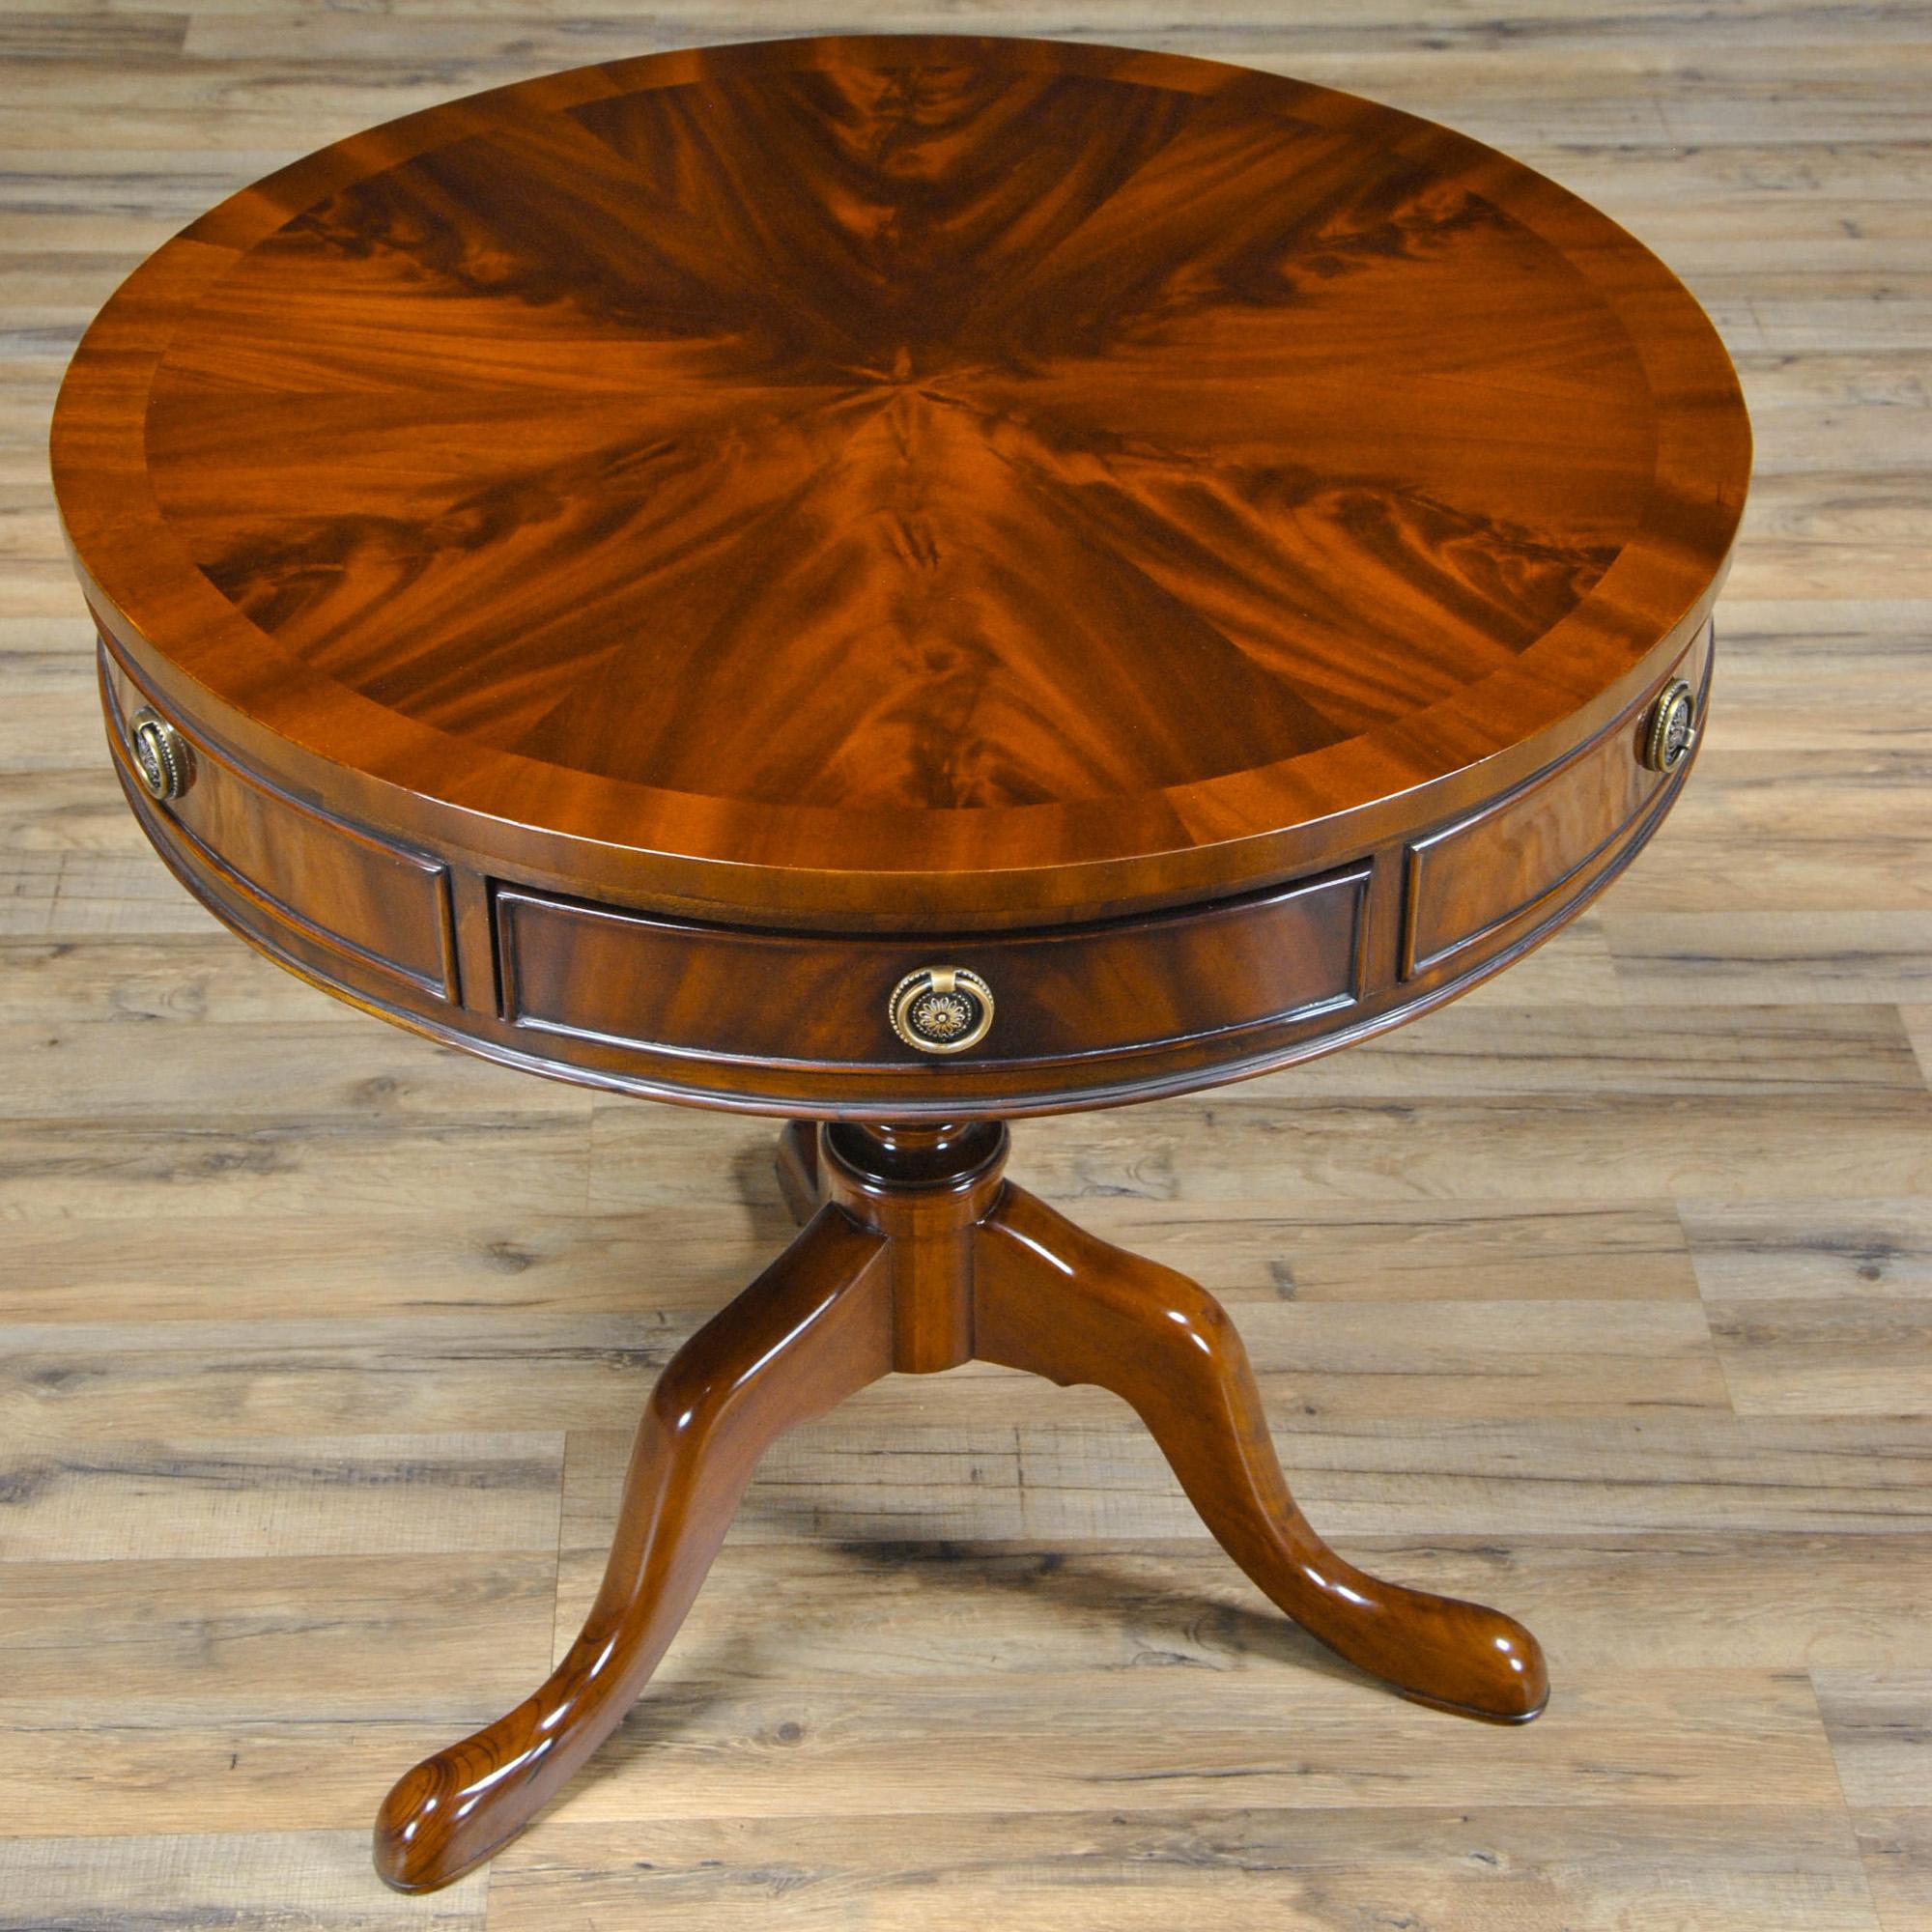 Our Queen Ann style Mahogany Drum Table is a smaller drum table that makes a great accessory item. The Mahogany Drum Table as produced by Niagara Furniture features three dovetailed drawers, beautiful banded top, designer hardware, an urn shaped